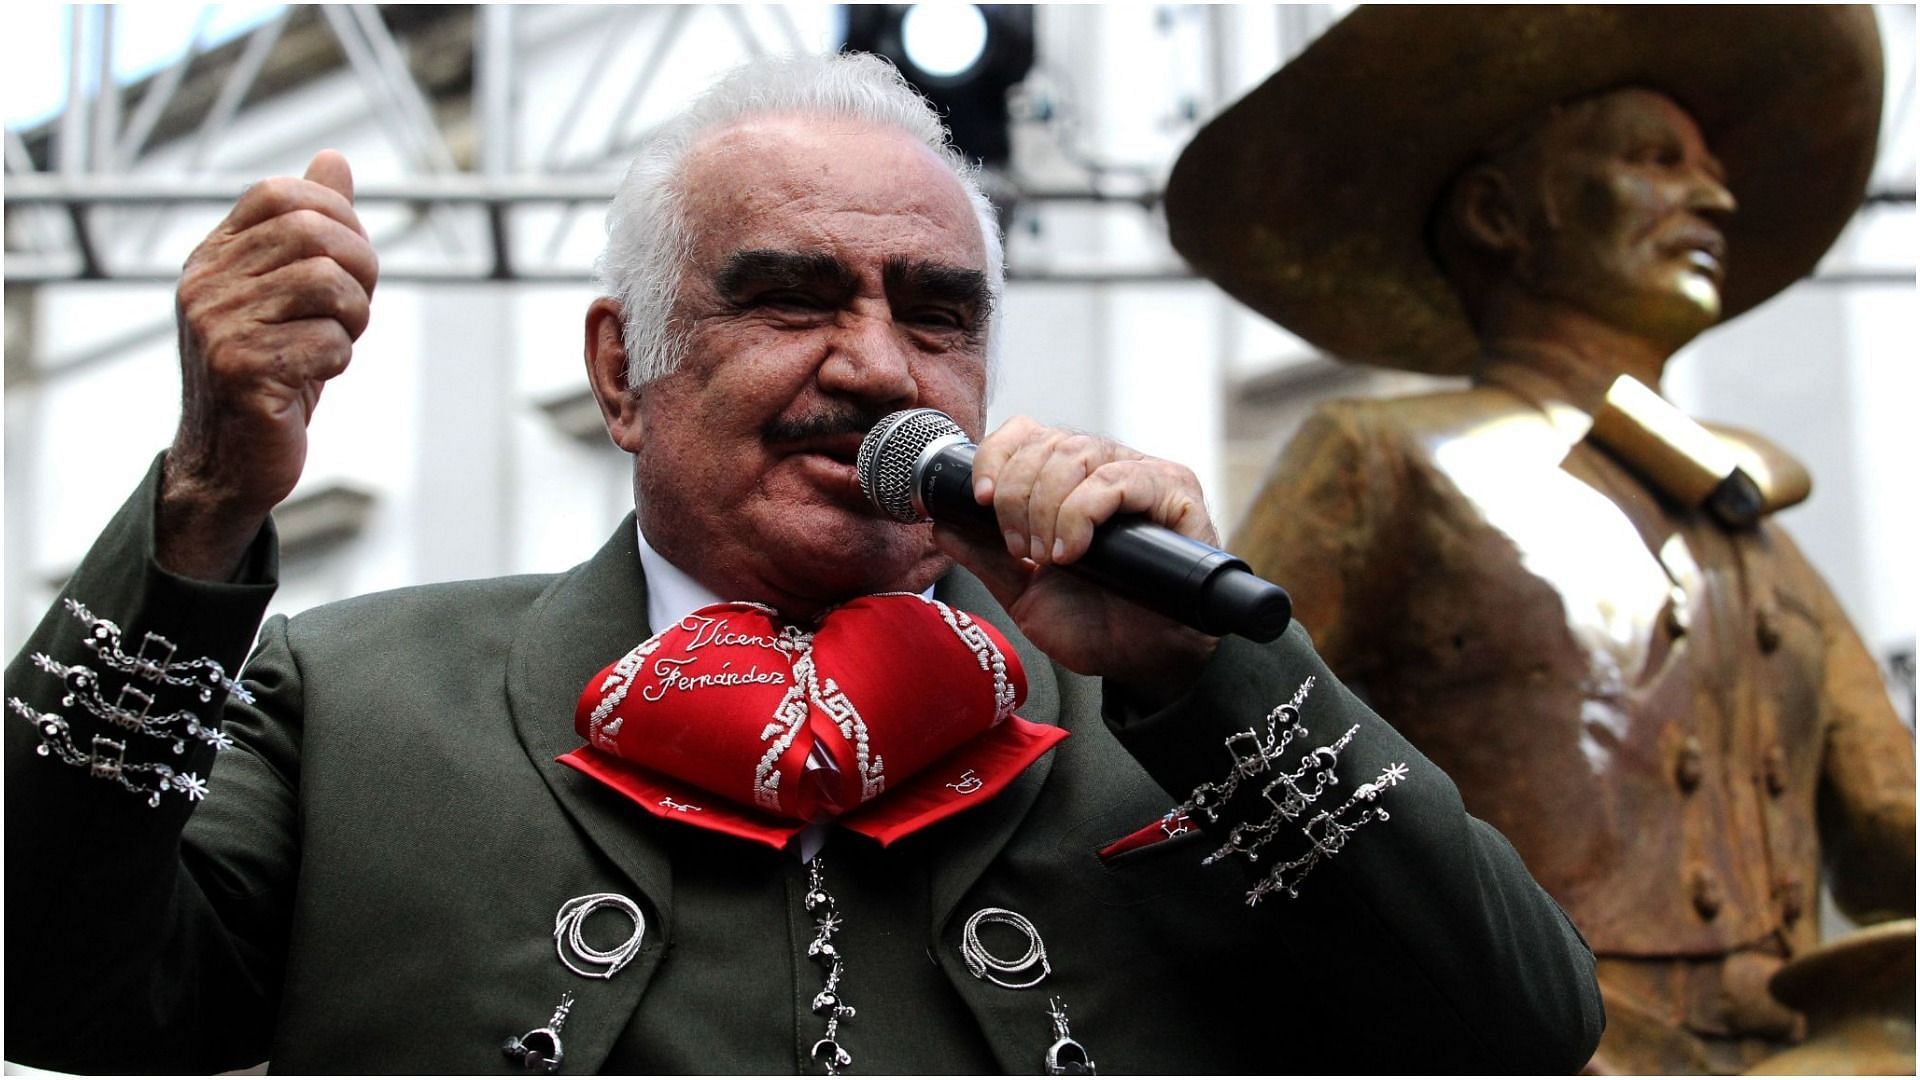 Vicente Fern&aacute;ndez sings during the unveiling of a life-size statue in his honour, at the Mariachis square in Guadalajara (Image by Ulises Ruiz via Getty Images)